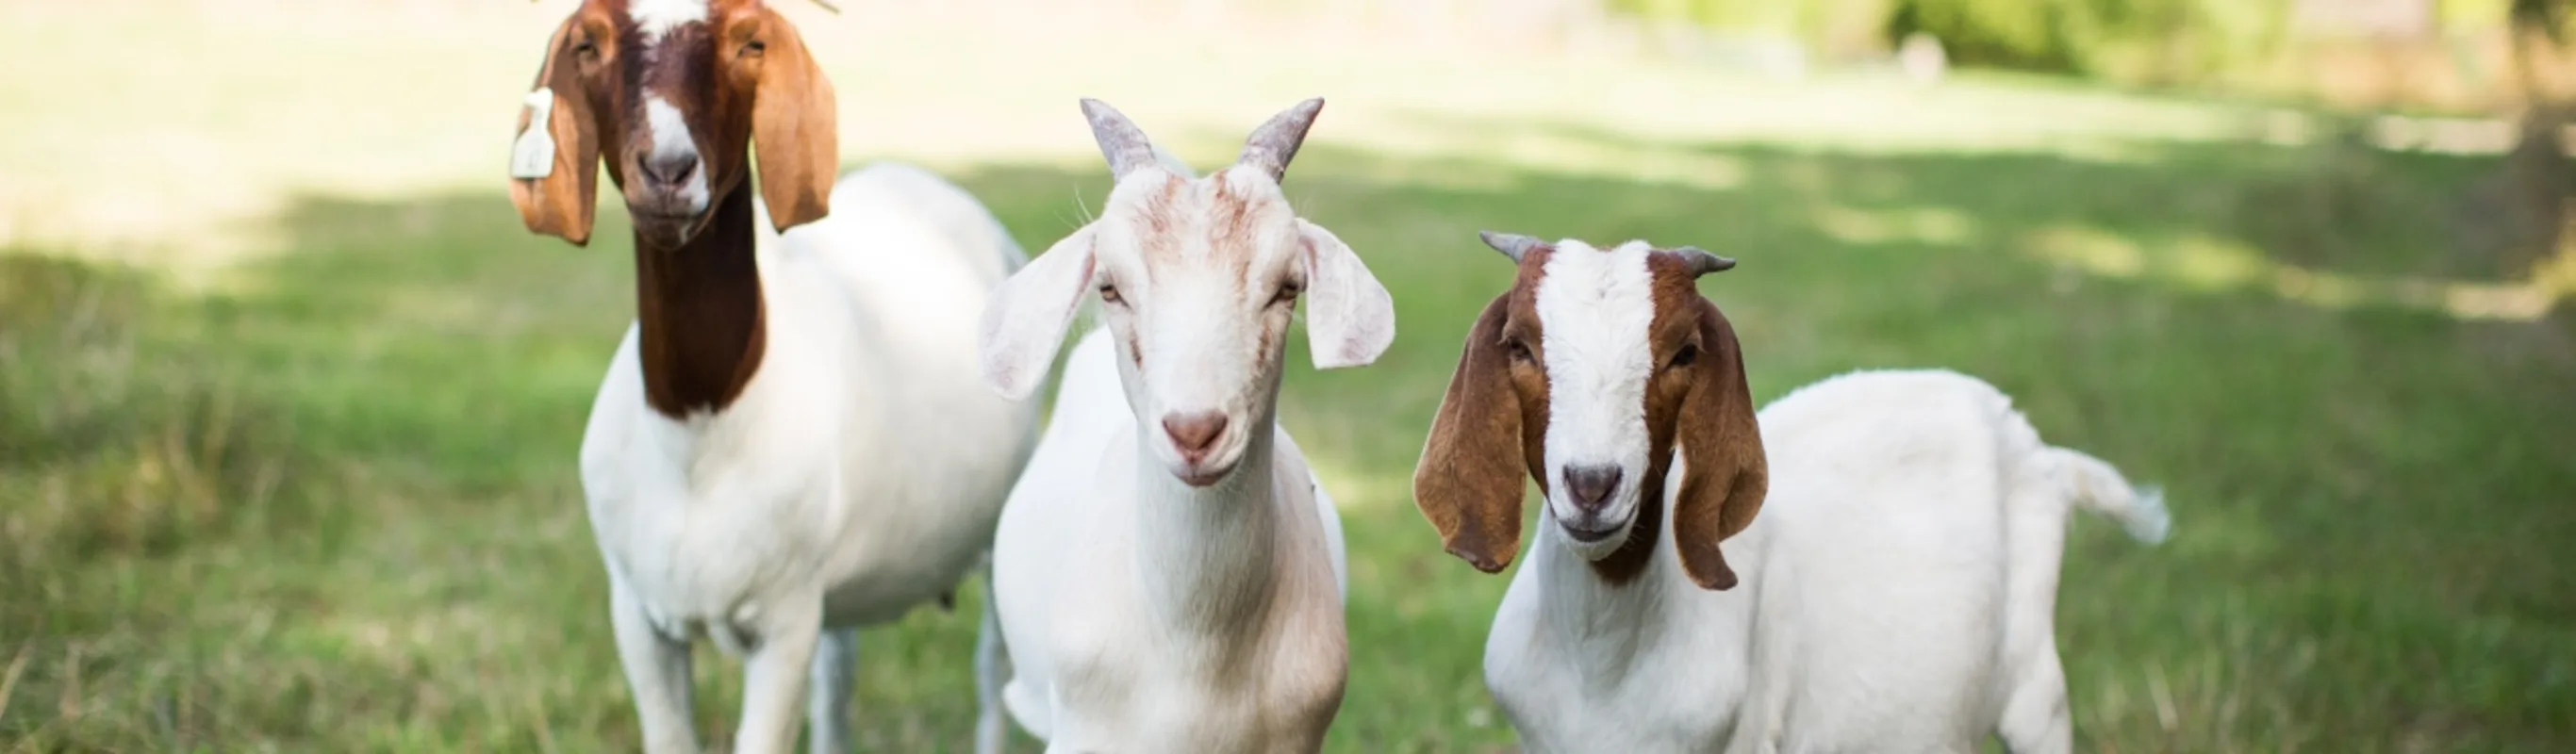 3 goats standing next to each other in rural grassy setting